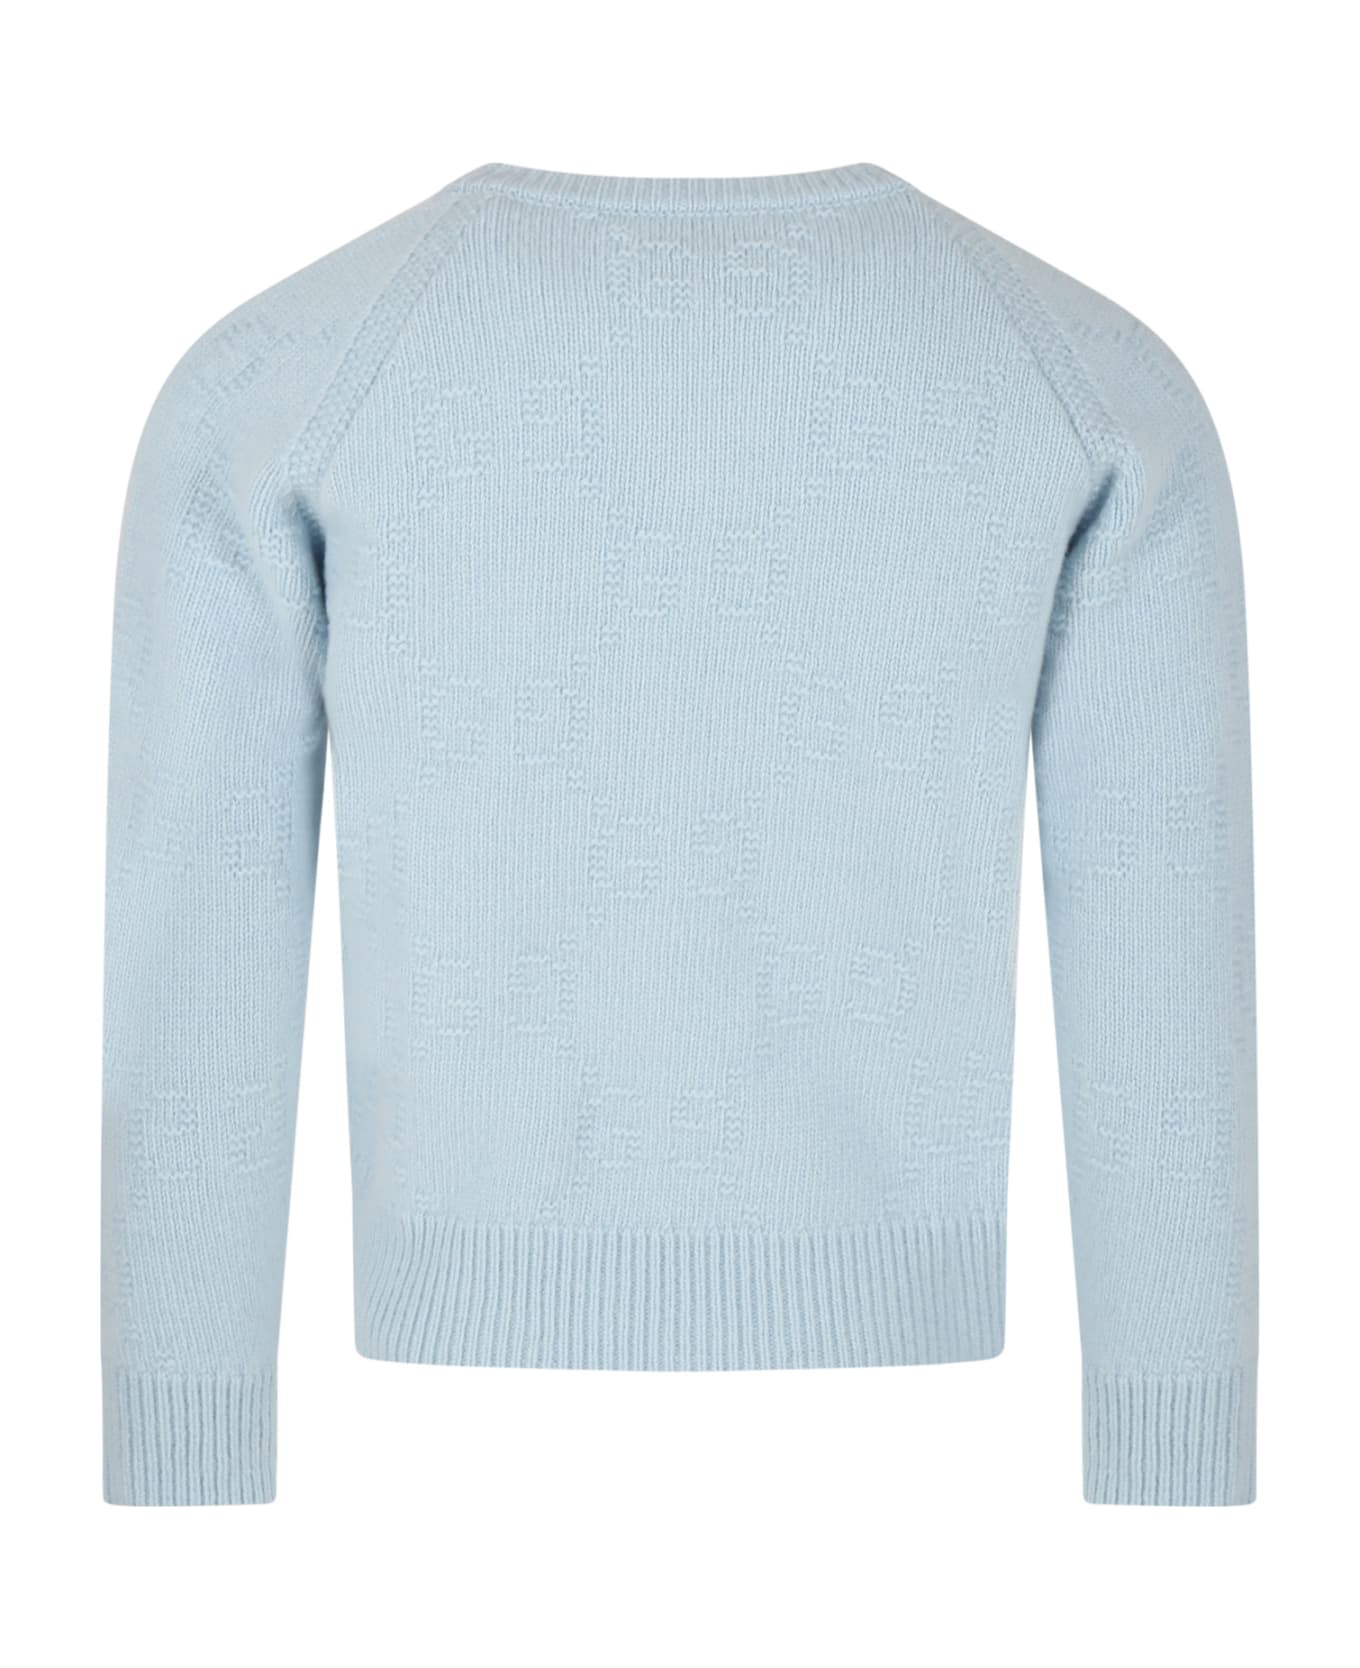 Gucci Light Blue Sweater For Kids With Double Gg - Light Blue